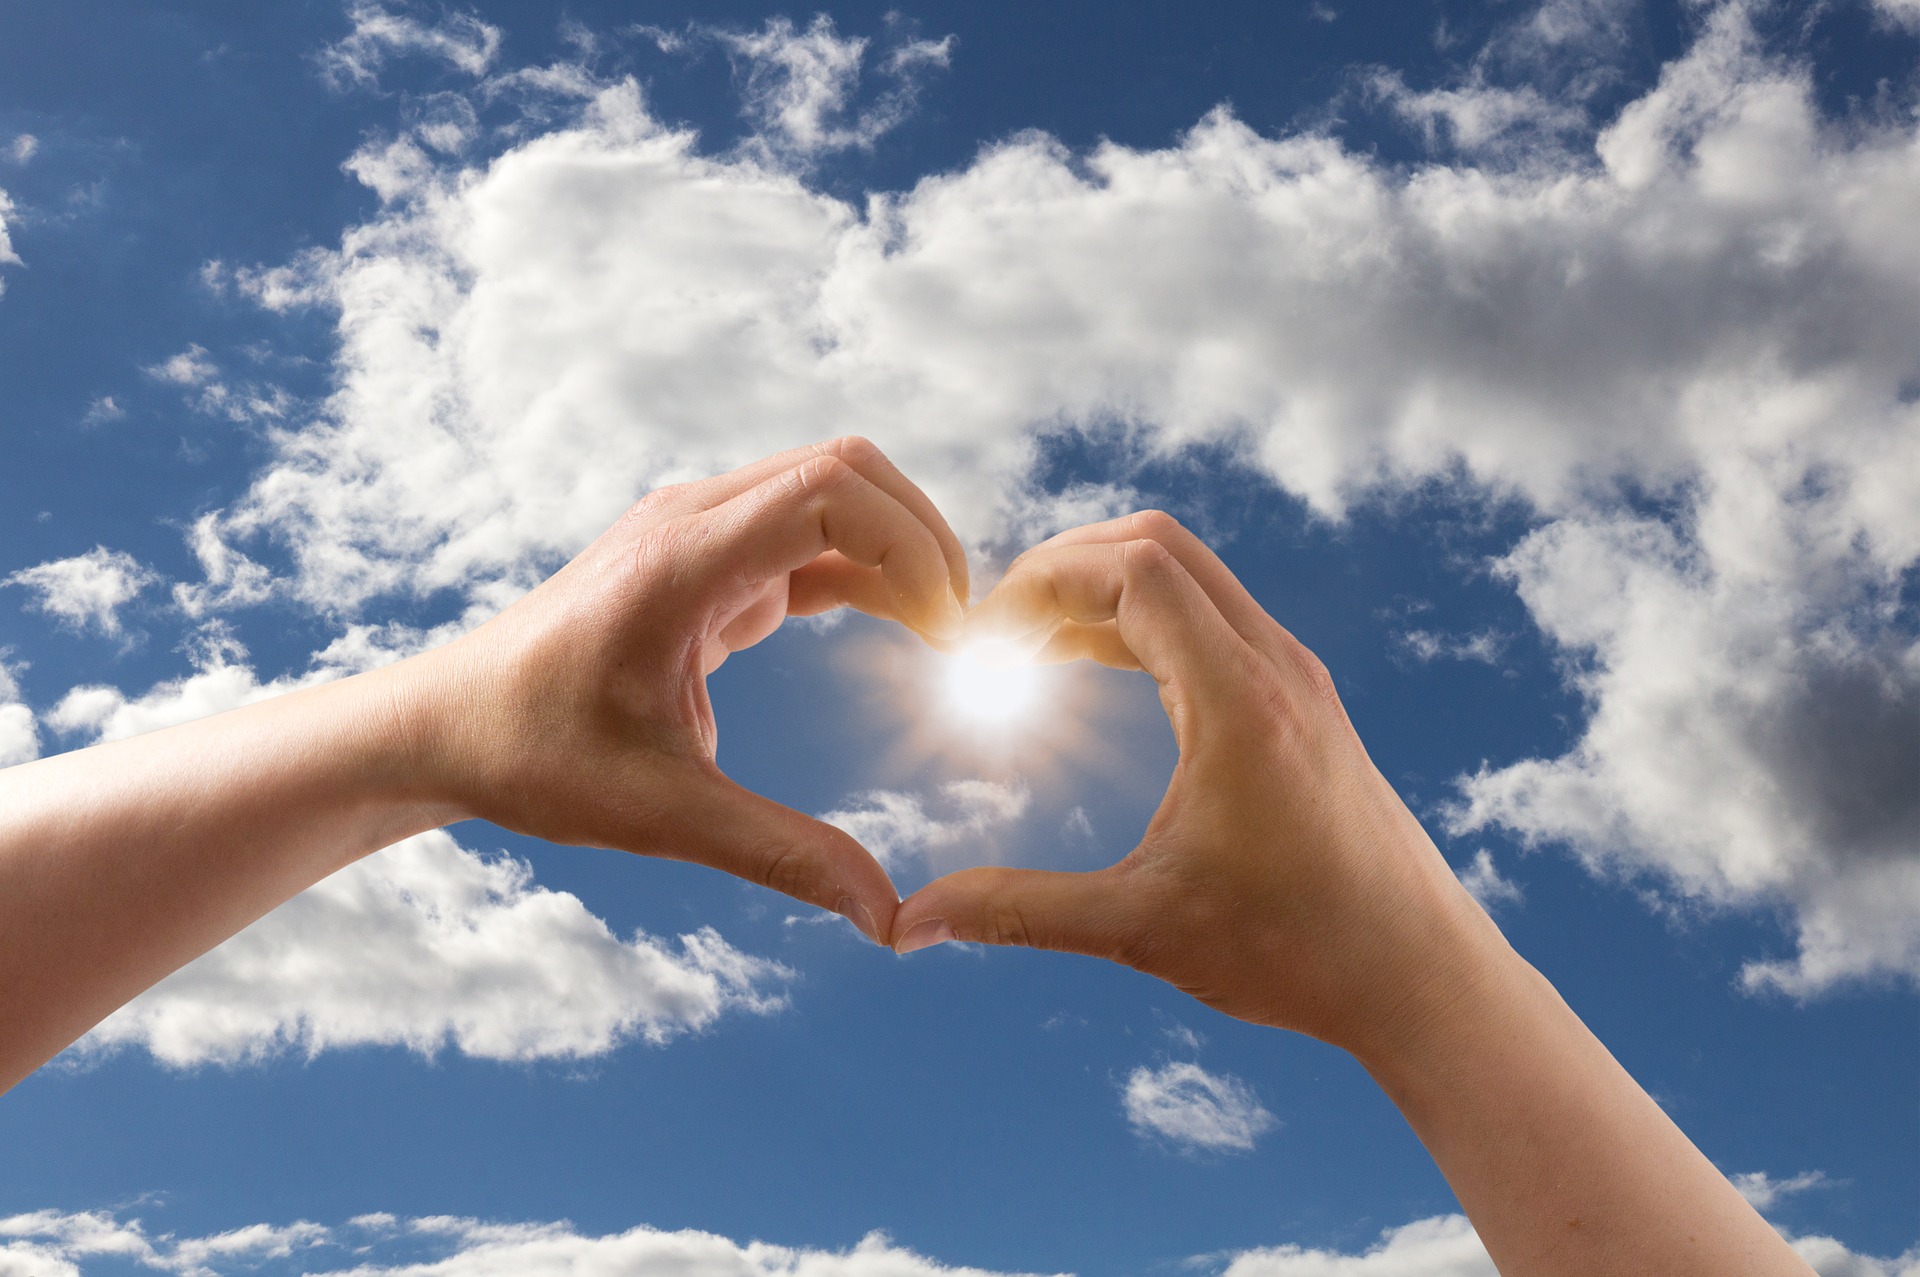 two hands making a heart shape with sky and clouds behind them